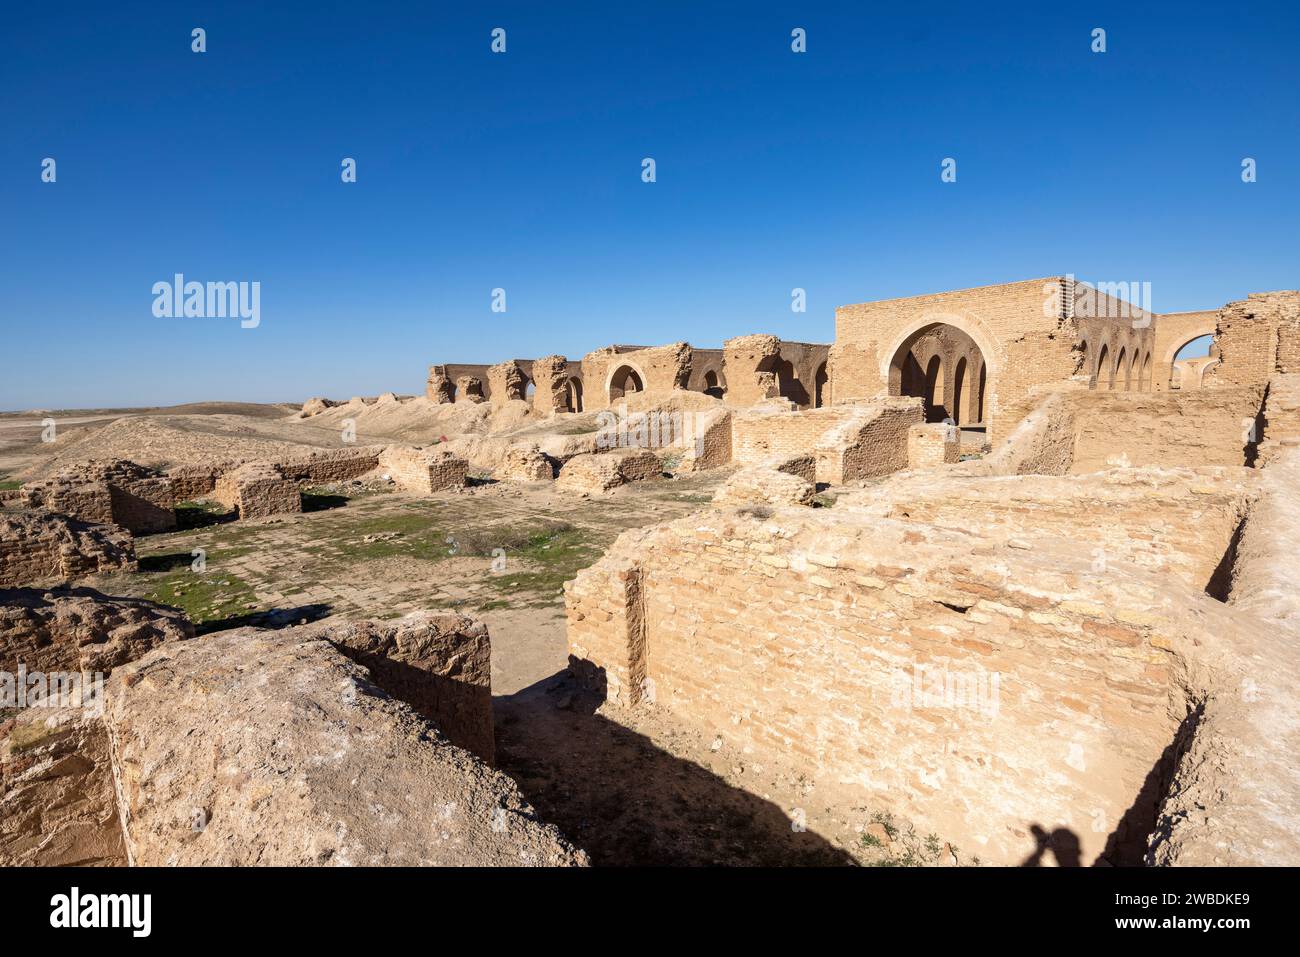 view of caliph's changing rooms adjacent to the 9th century Abbasid Abu Dulaf Mosque, Samarra, Iraq Stock Photo